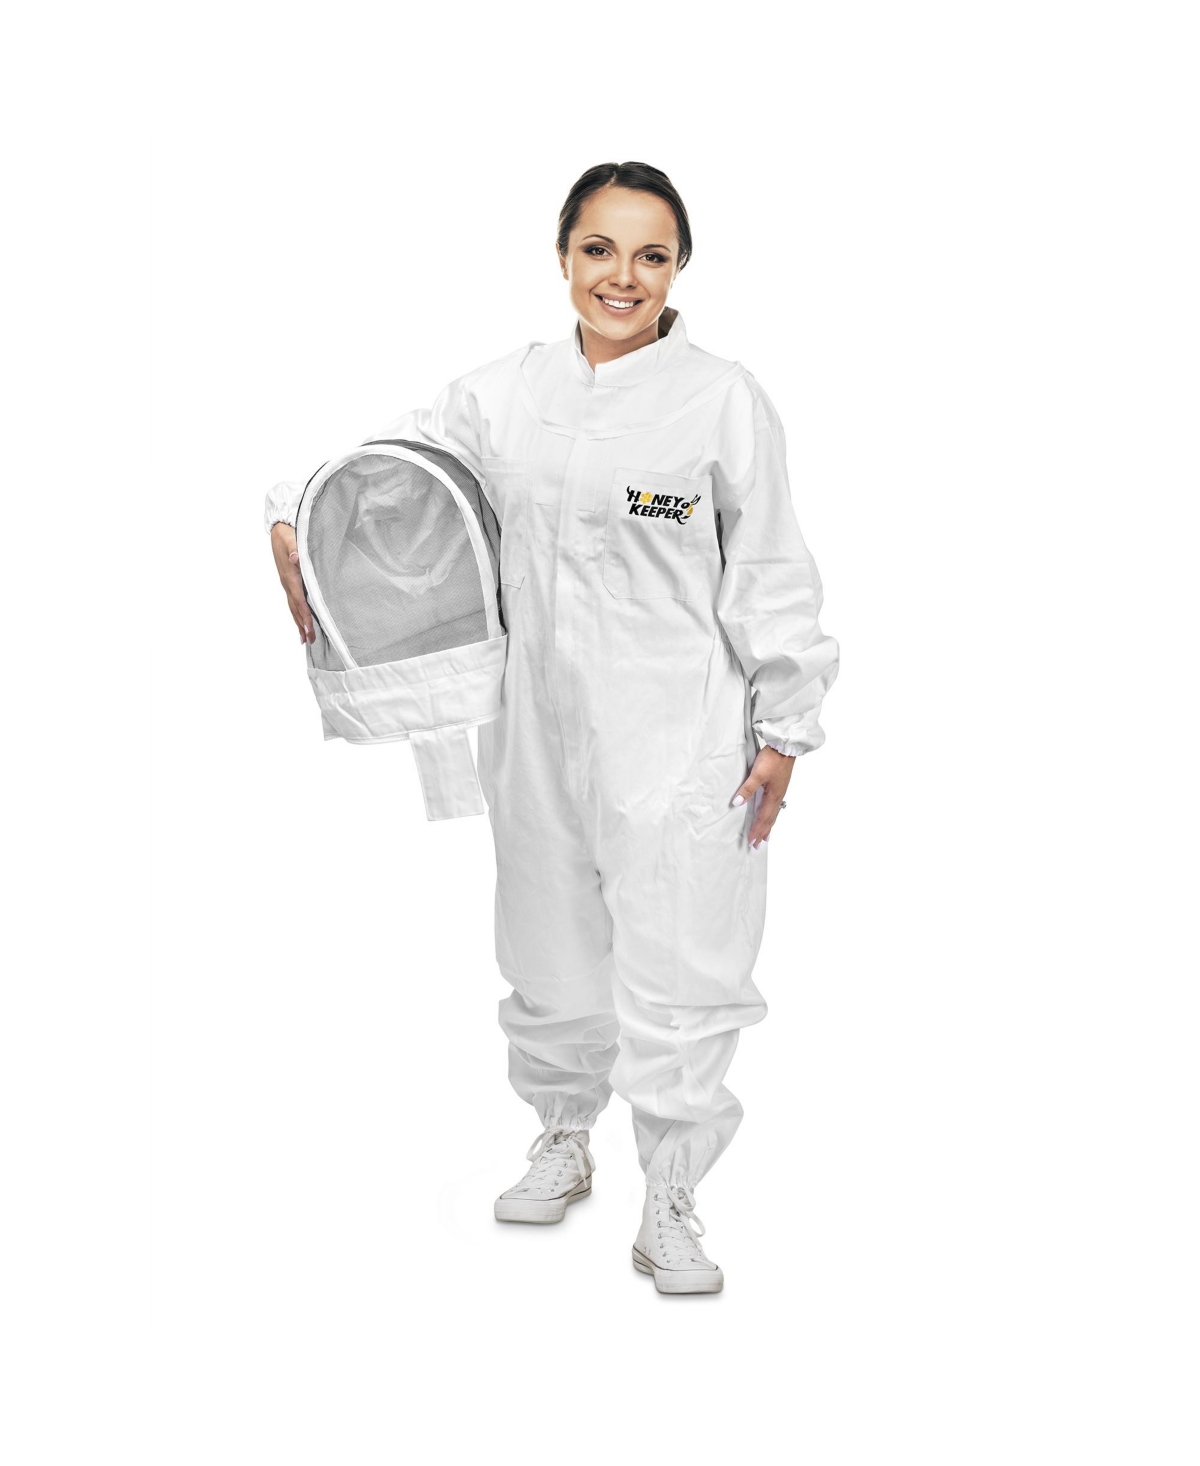 Professional Cotton Full Body Beekeeping Suit with Self Supporting Veil Hood - Large - White